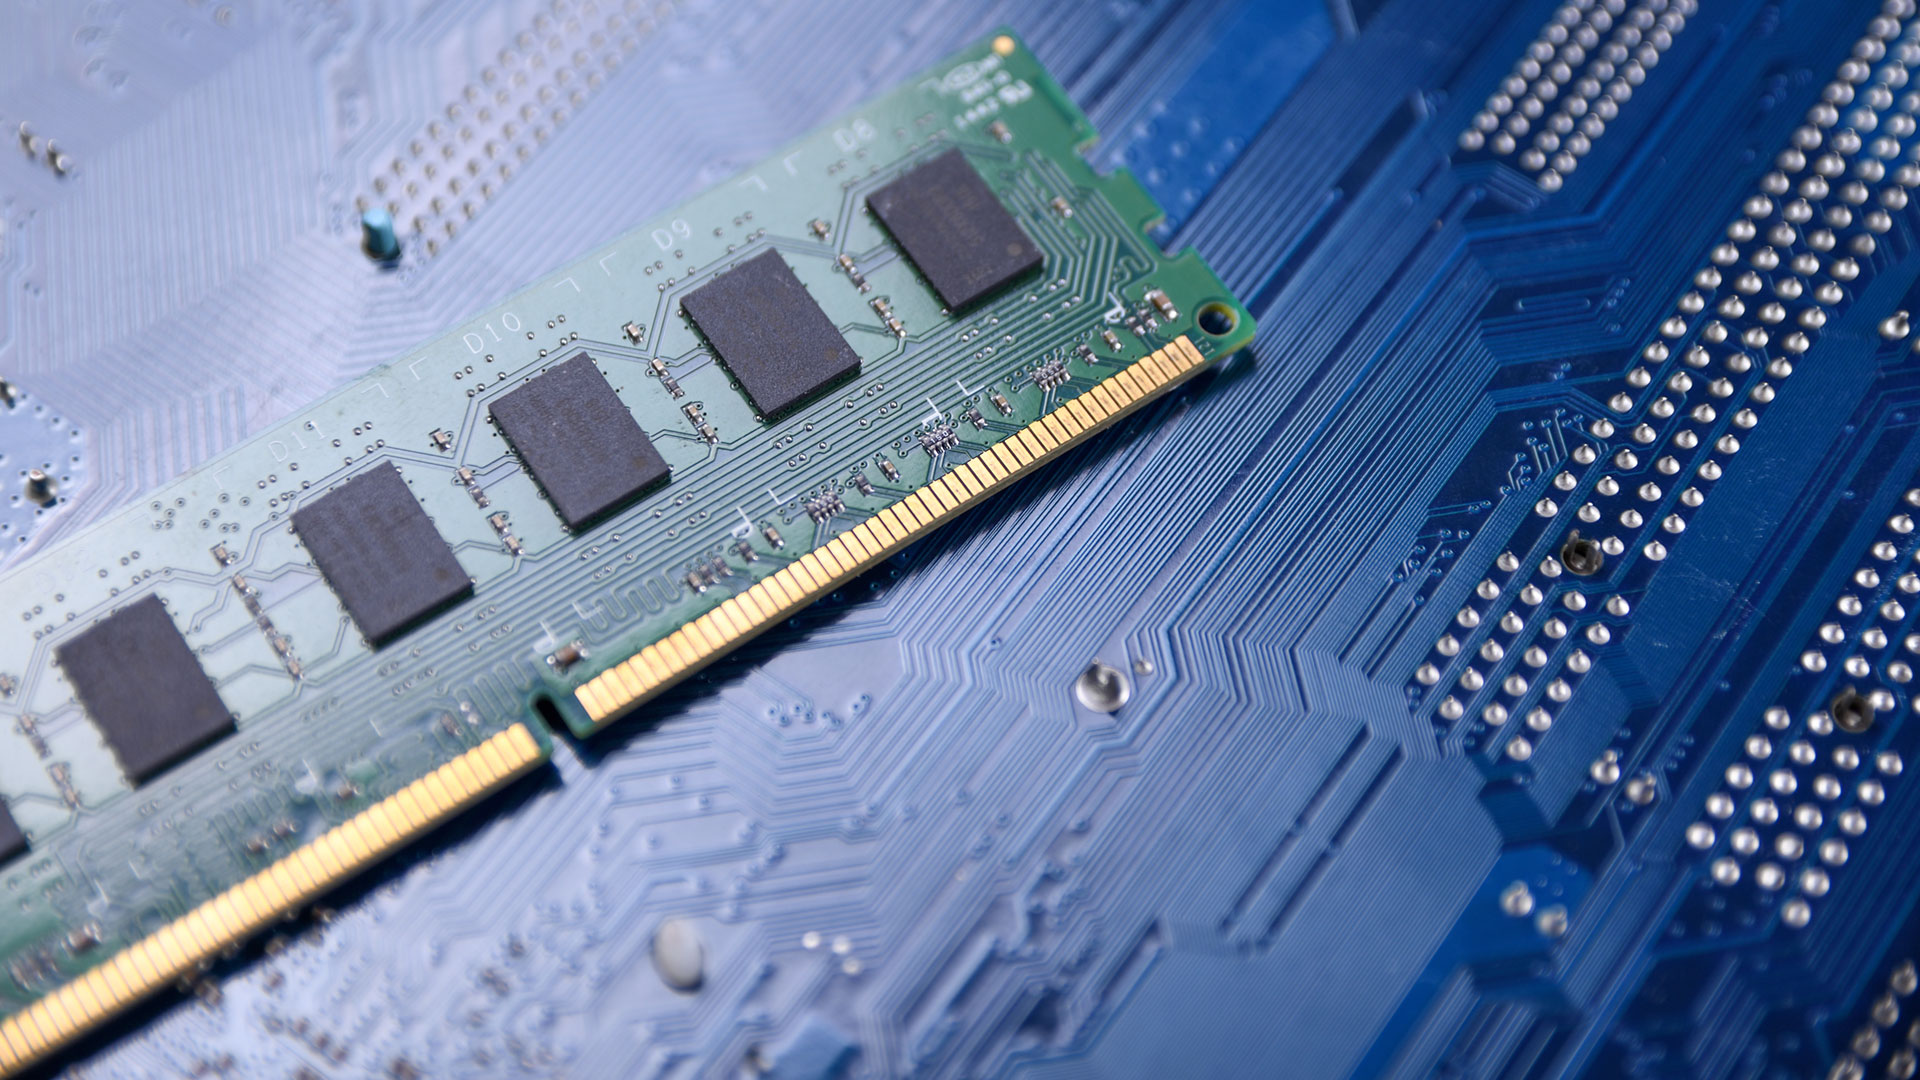 samsung-and-sk-hynix-abandon-ddr3-production-to-focus-on-unrelenting-demand-for-hbm3